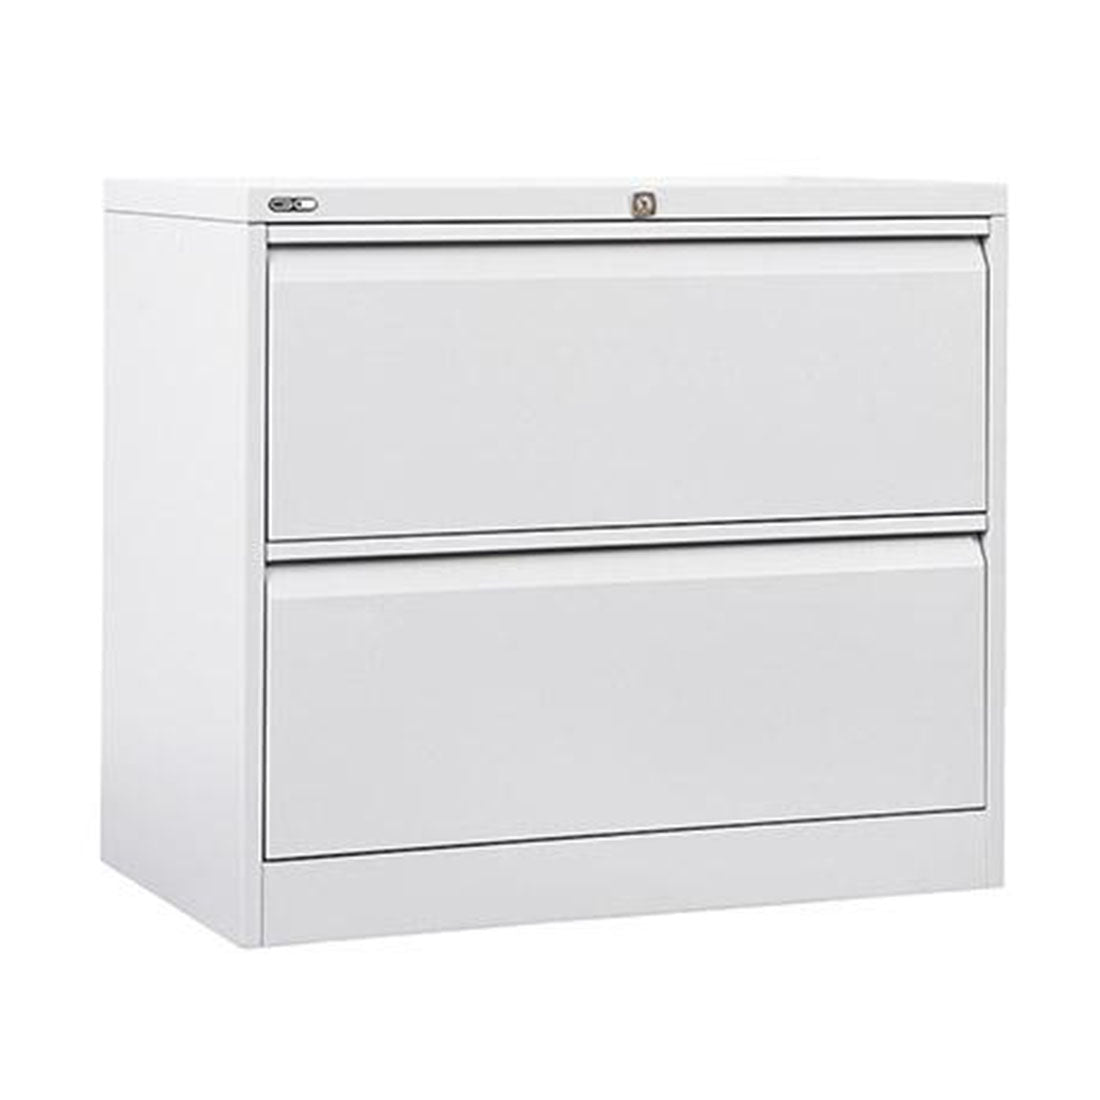 GO Lateral Filing Cabinet 2 Drawer - switchoffice.com.au